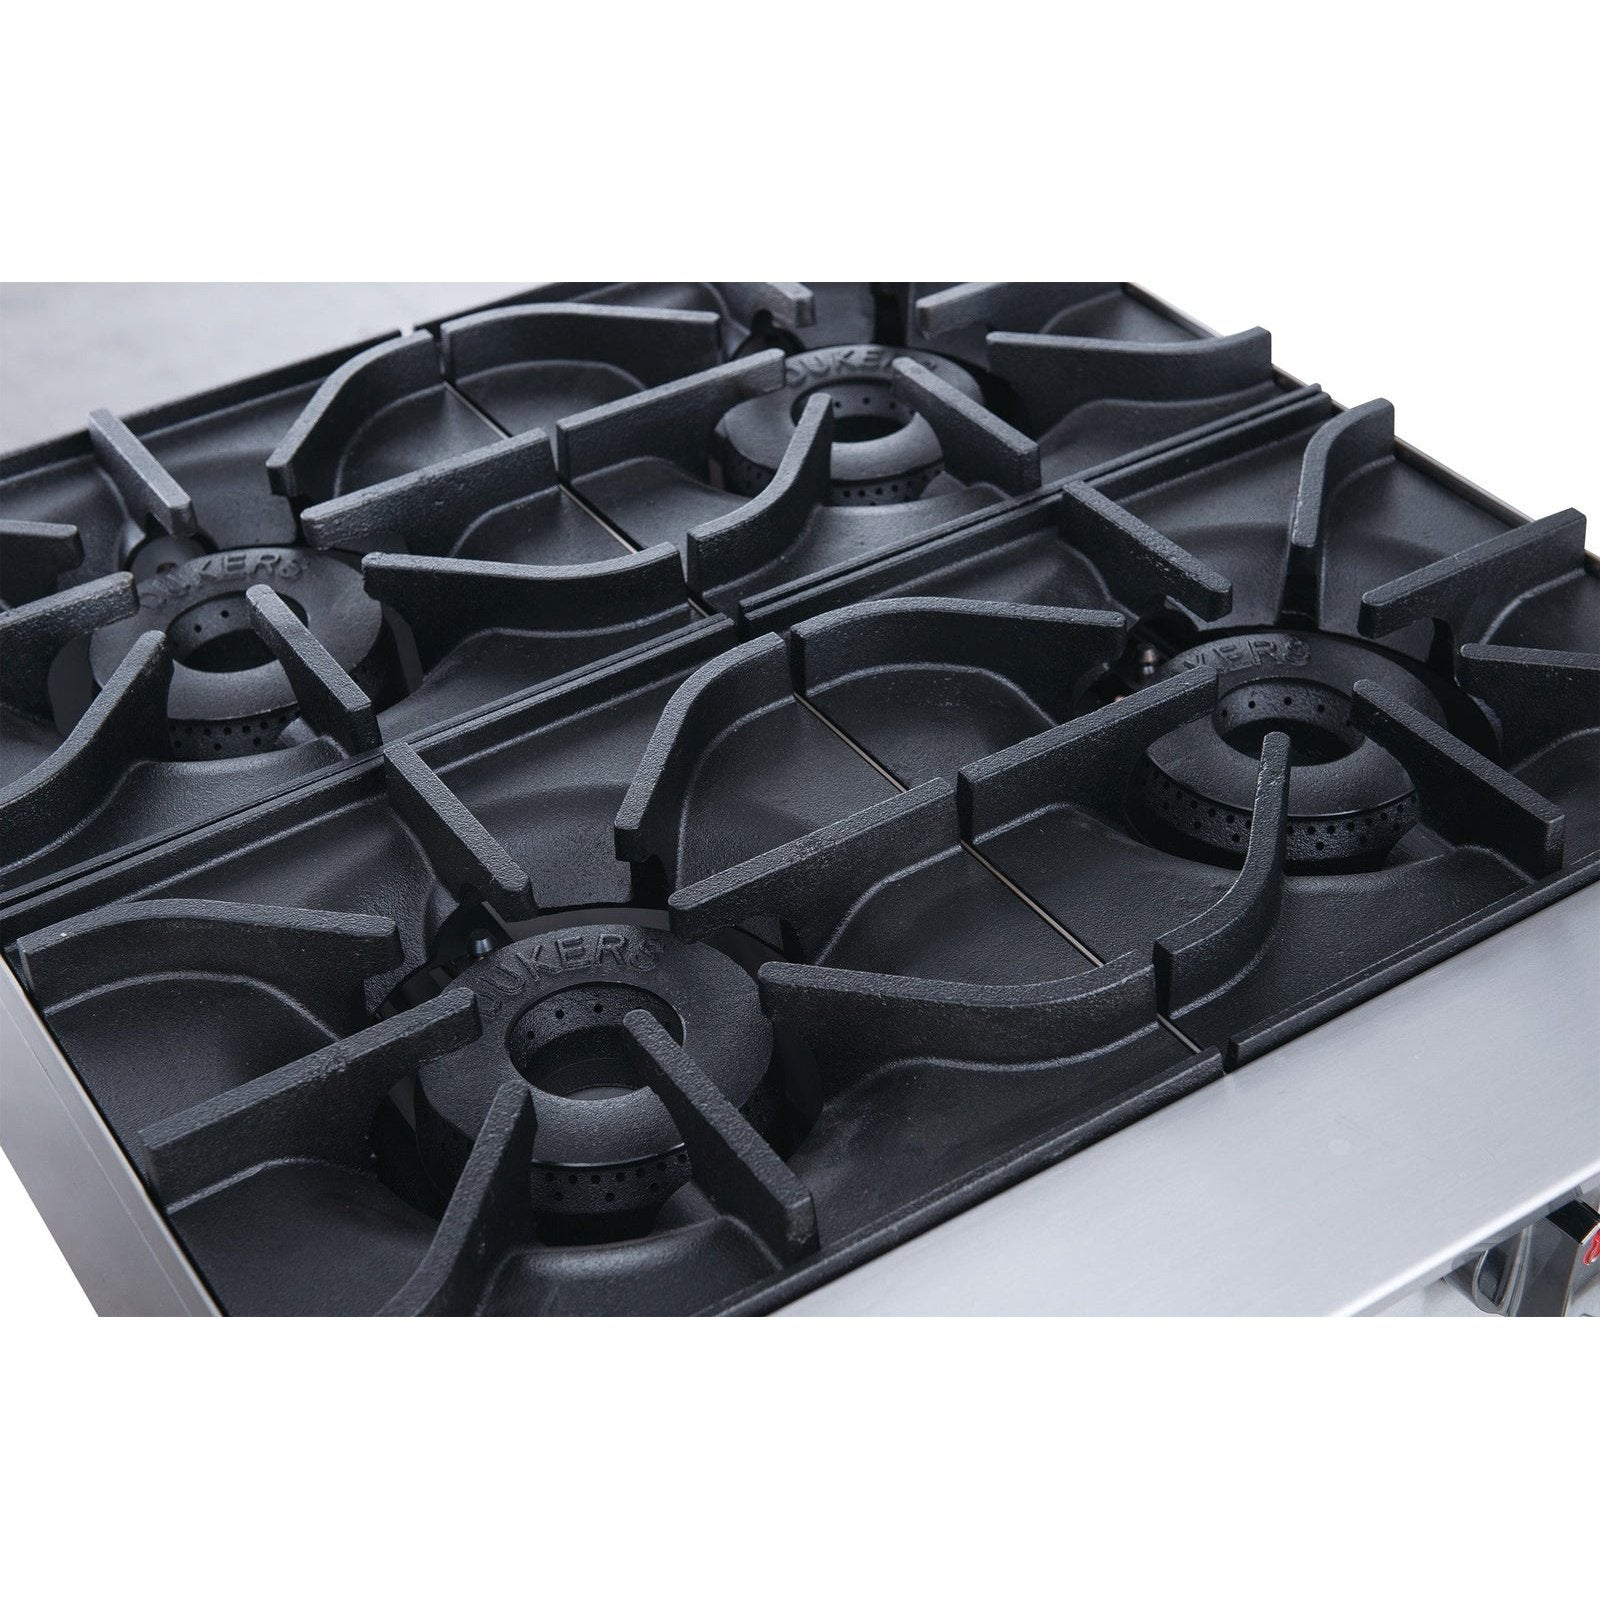 Dukers DCHPA48 Hot Plate with 8 Burners